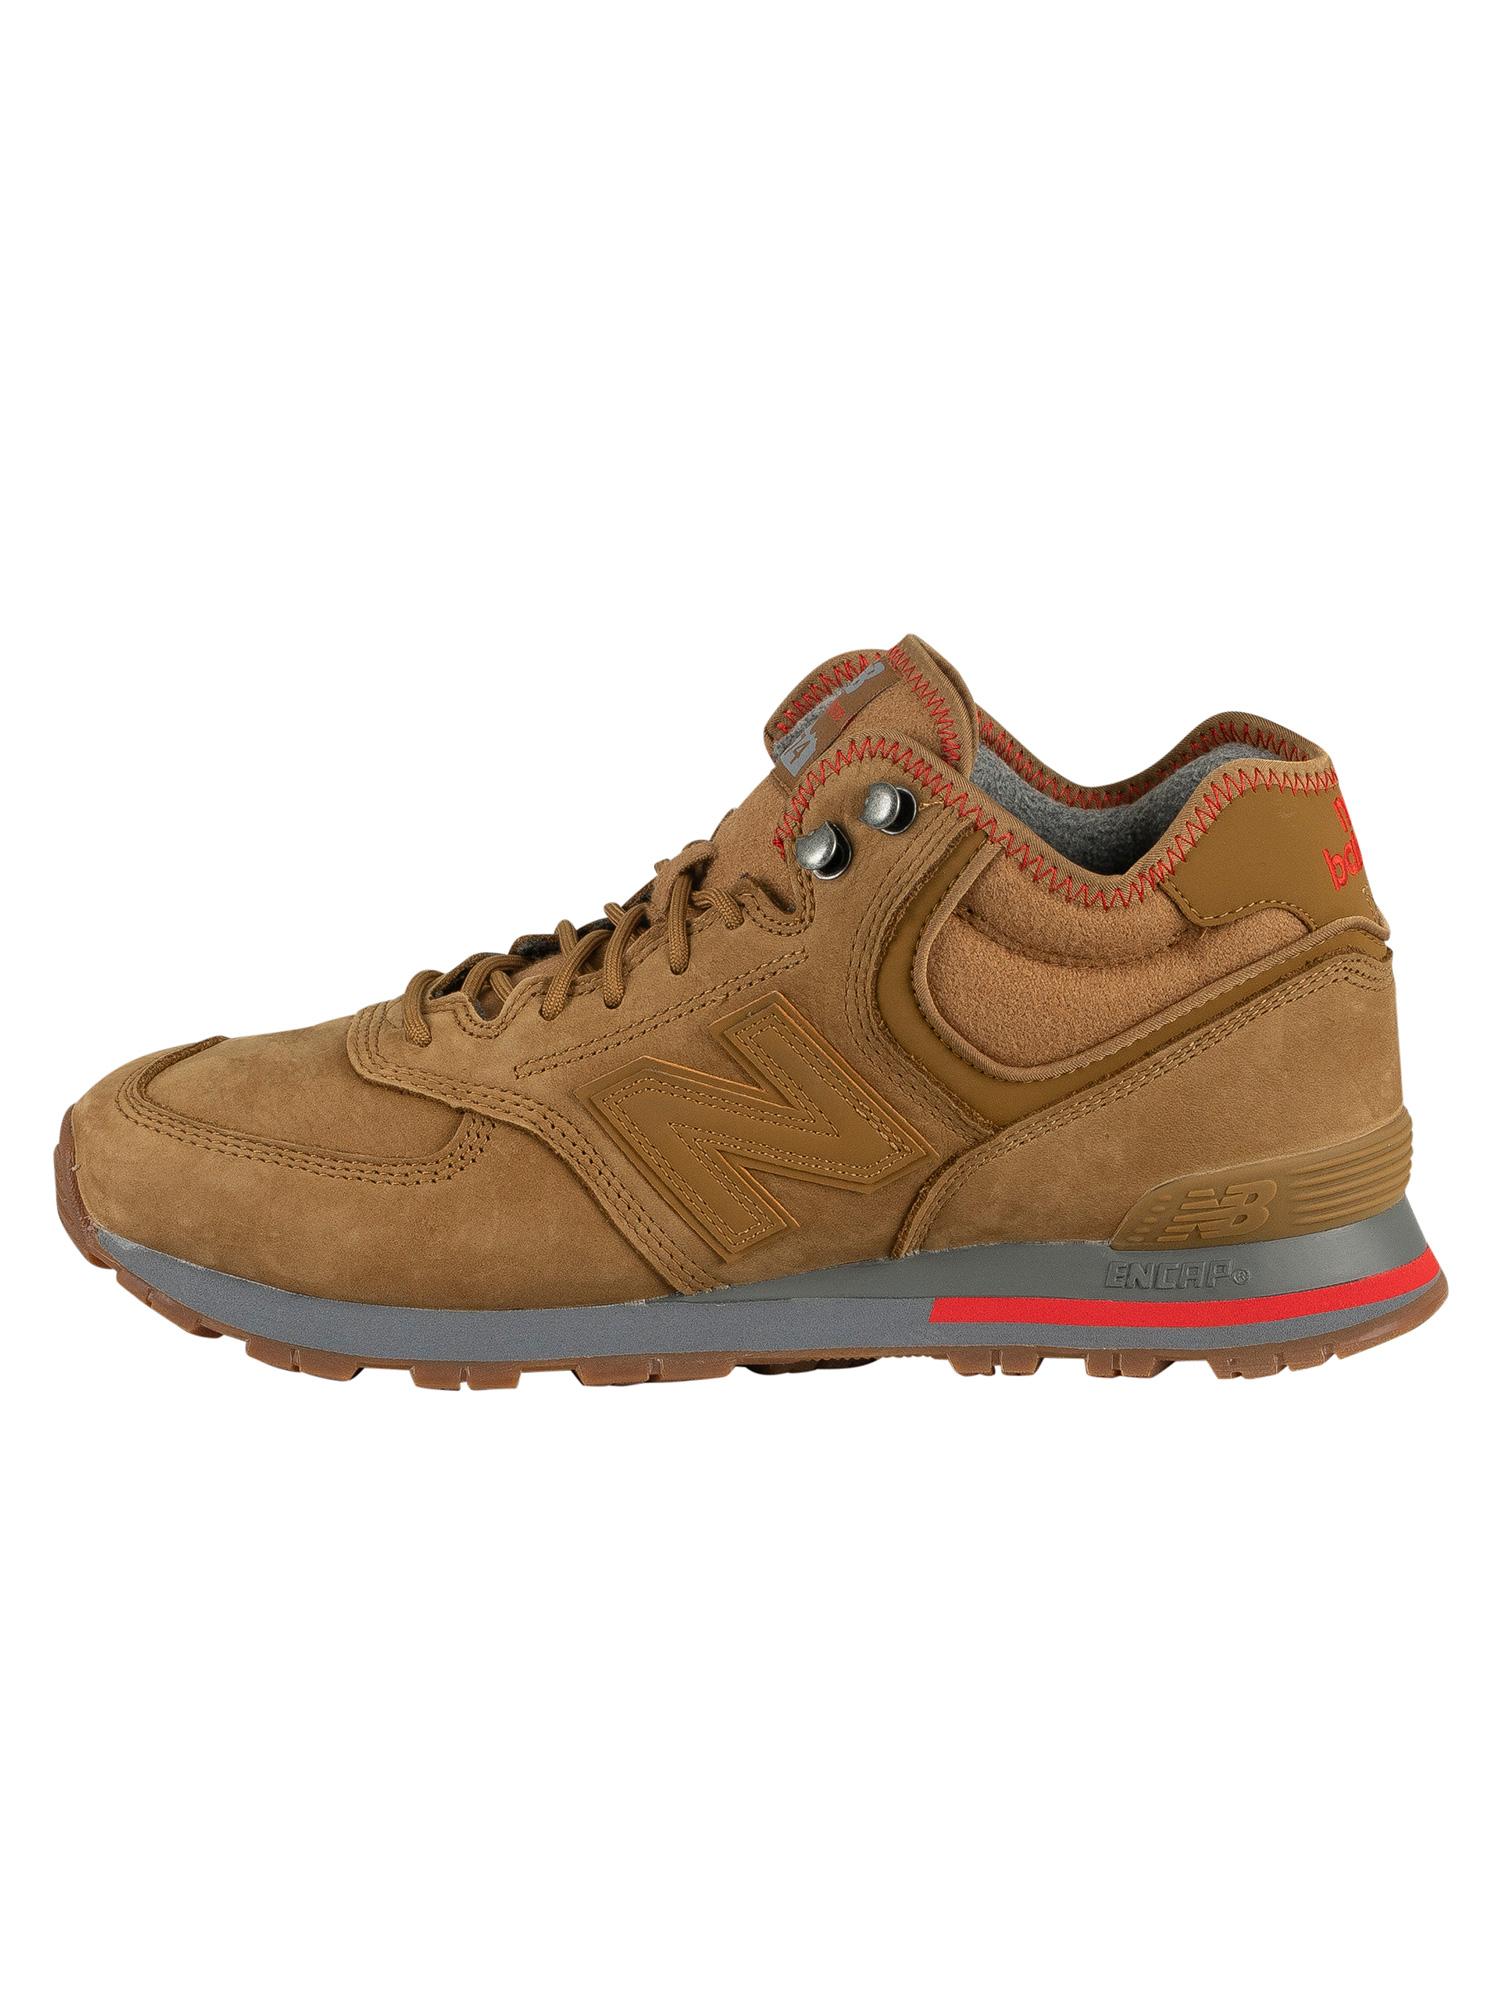 New Balance Leather 574 Mid Premium Hiker Trainers in Brown for Men | Lyst